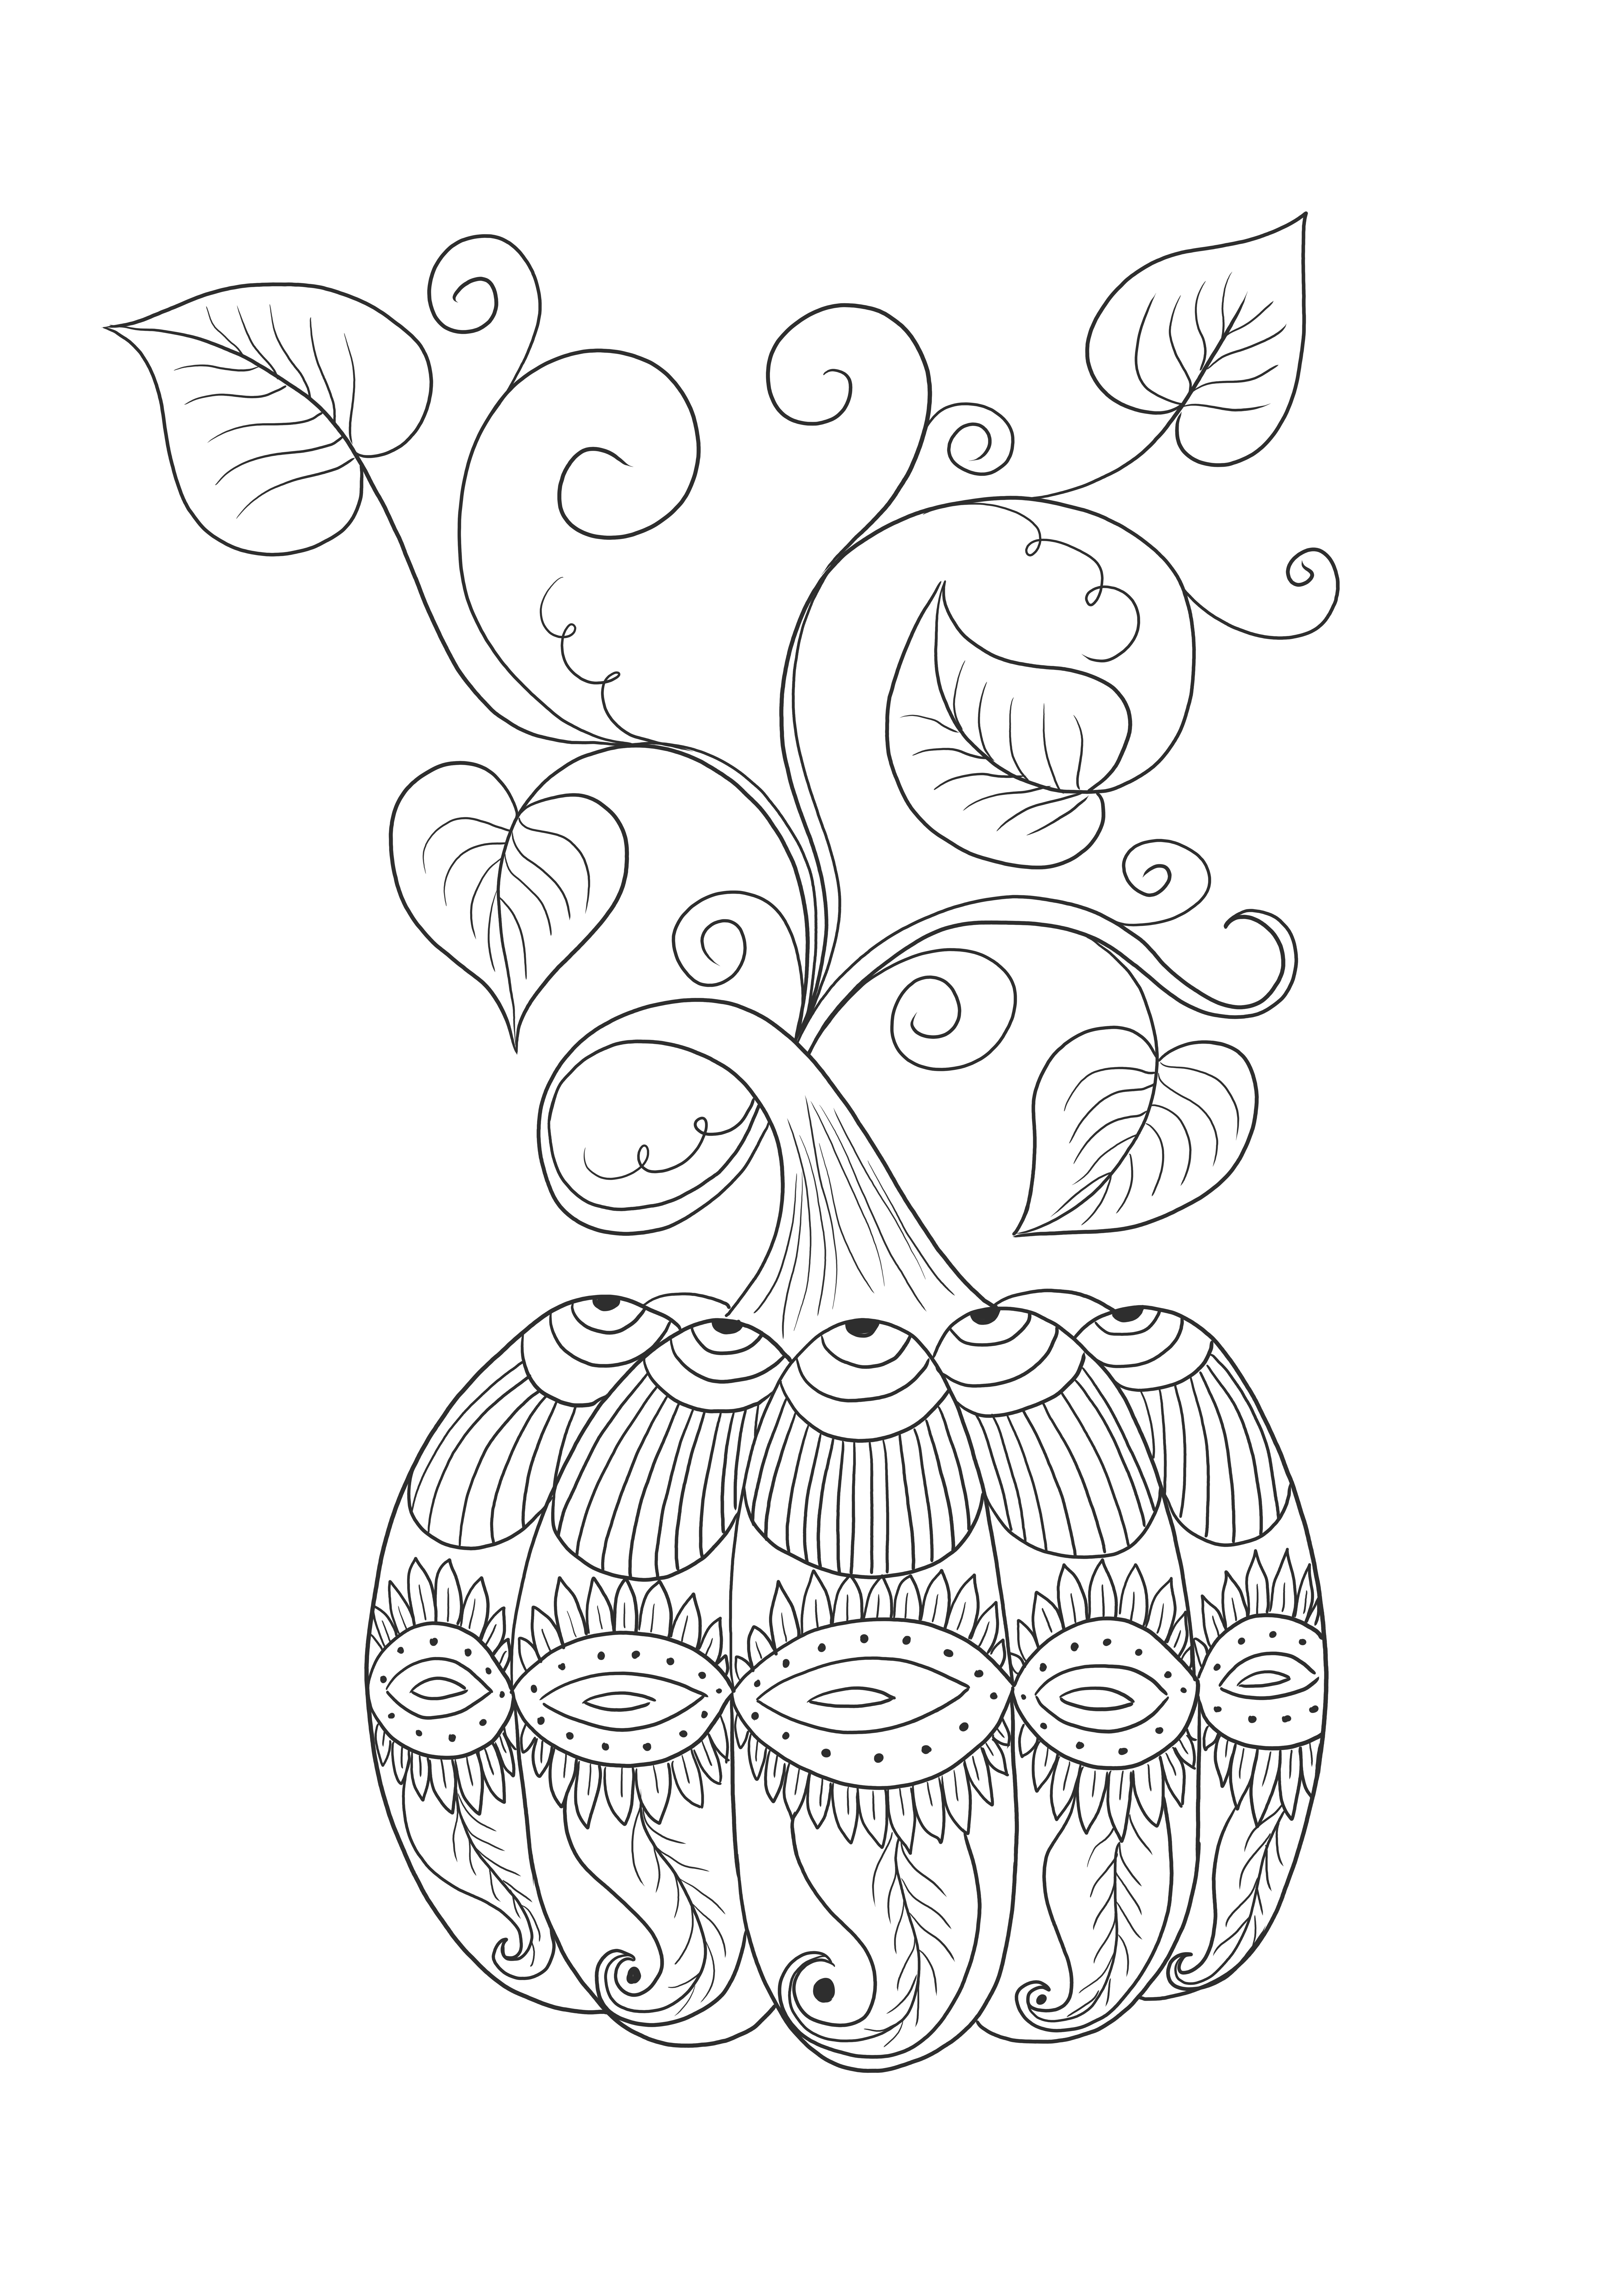 Zeta pumpkin coloring picture for fine Art lovers-free to download and print